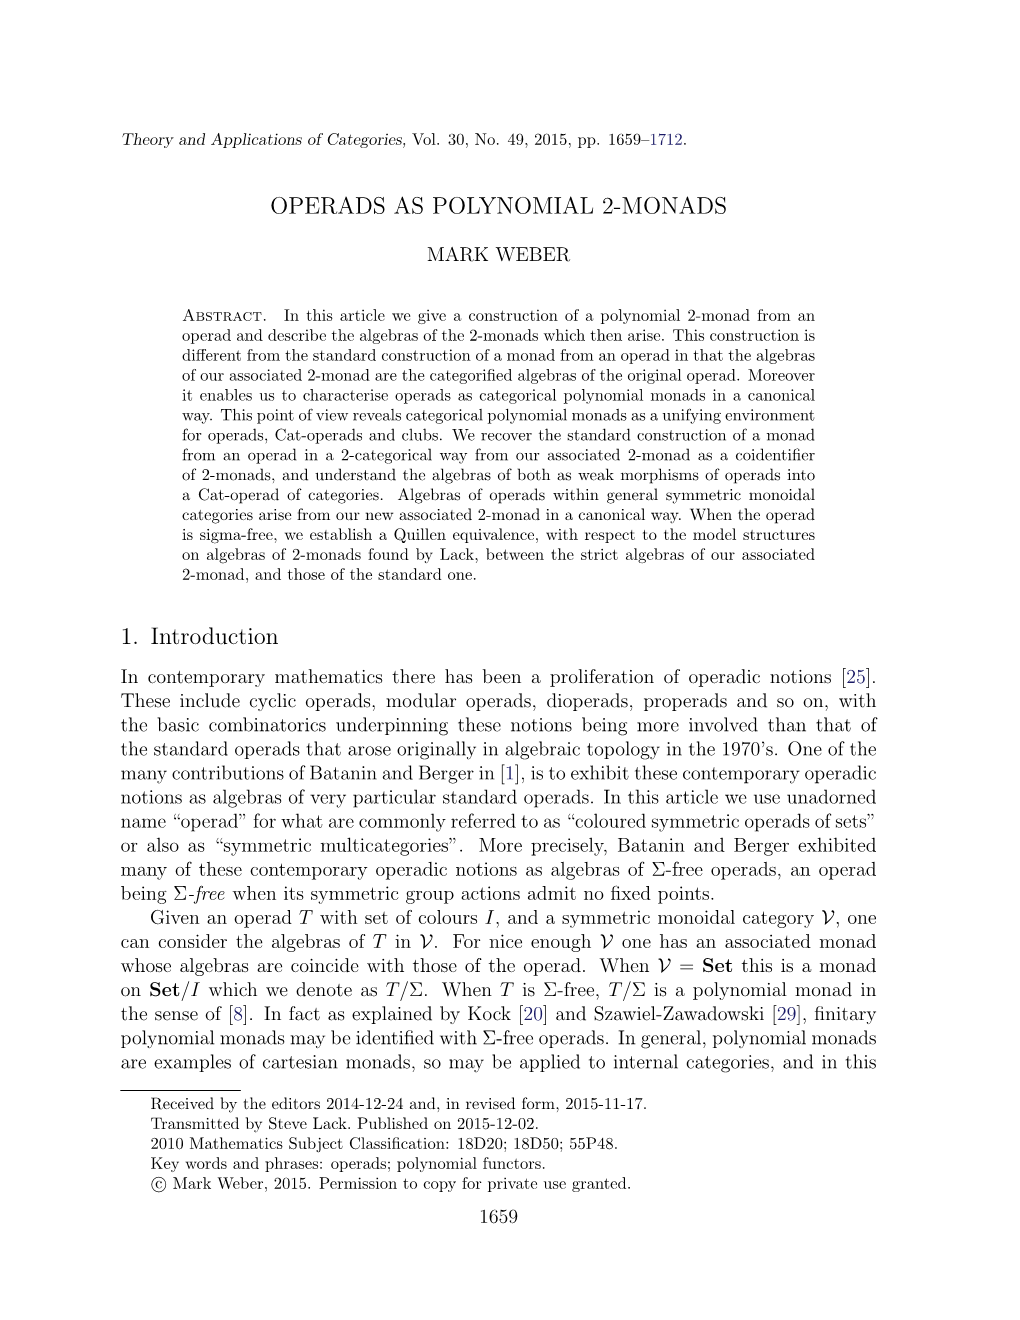 OPERADS AS POLYNOMIAL 2-MONADS 1. Introduction